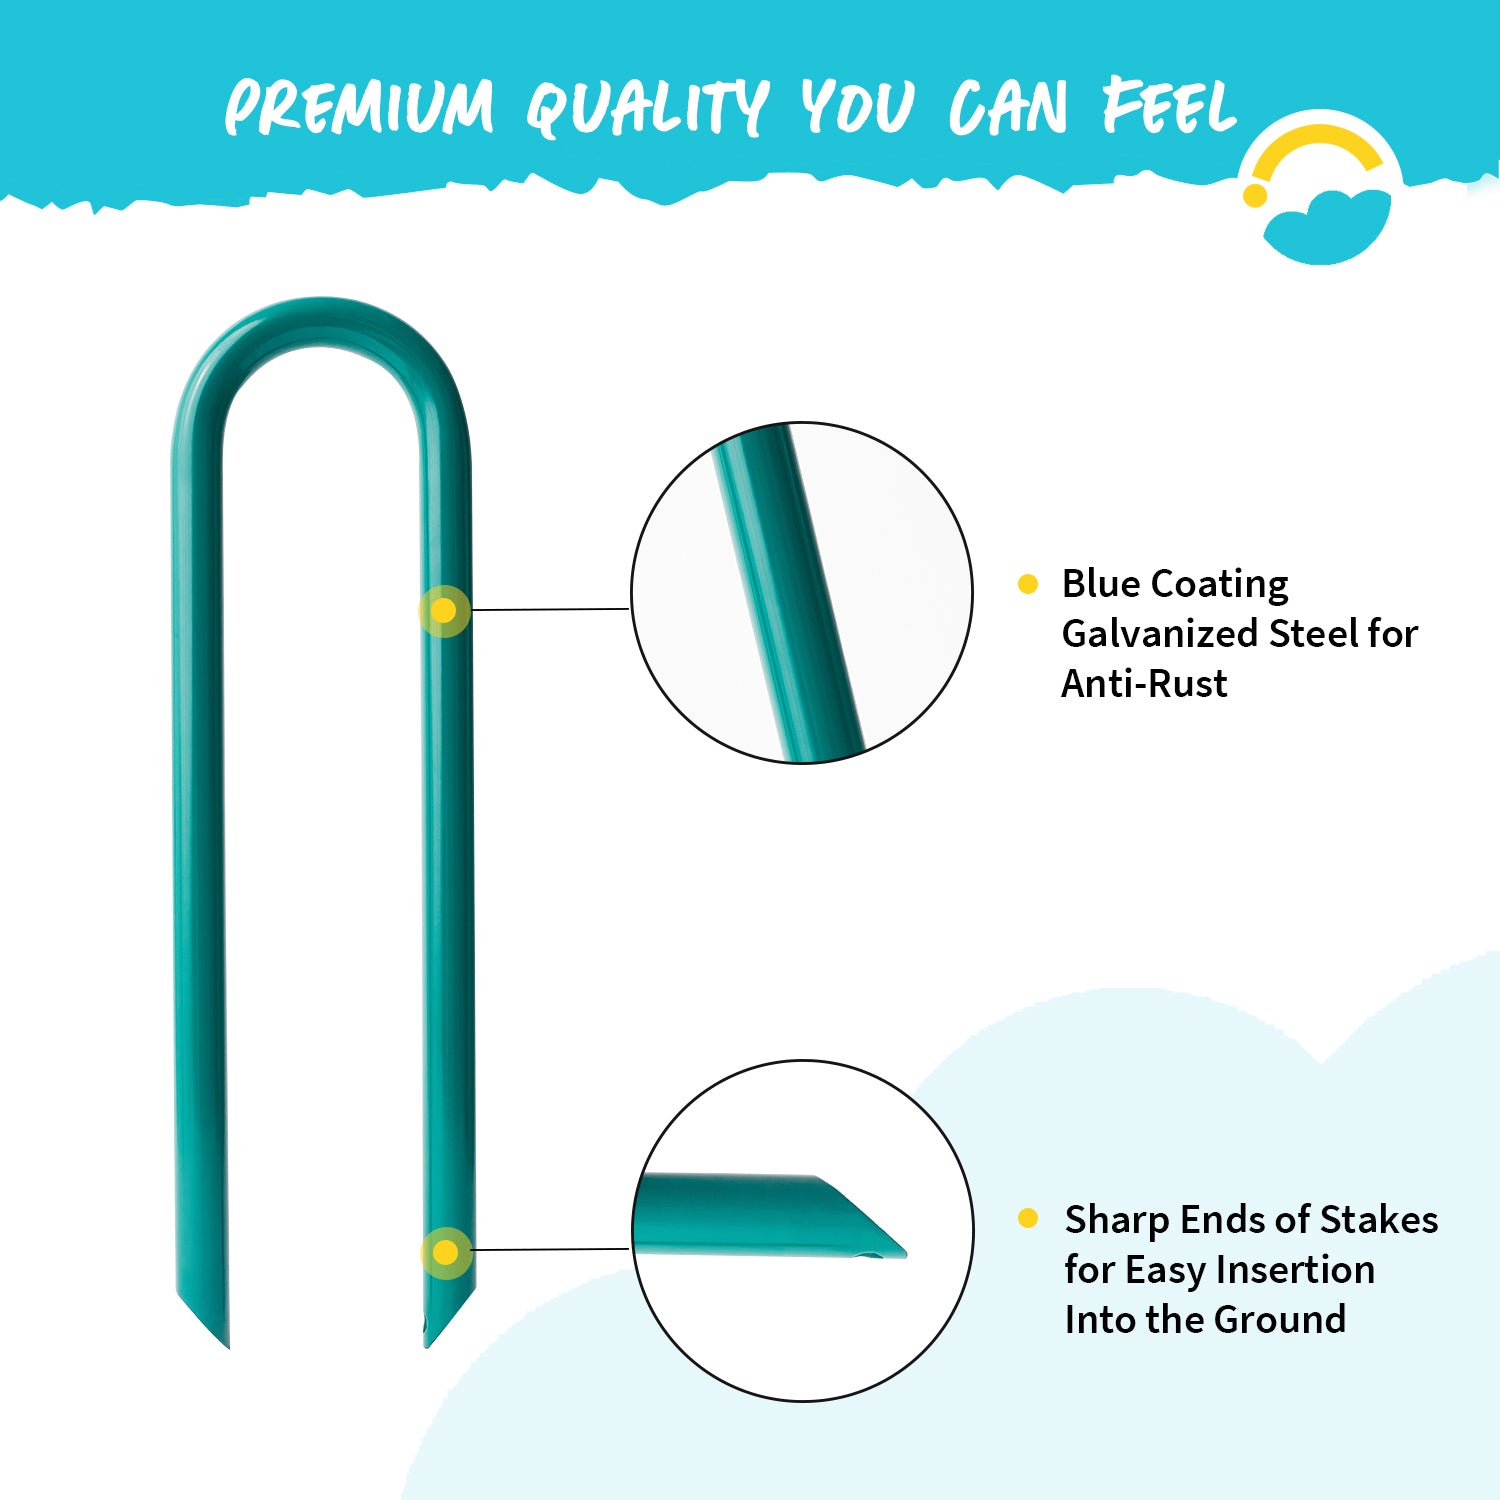 Premium Quality You Can Feel: Blue Coating Galvanized Steel for Anti-Rust. Sharp Ends of Stakes for Easy Insertion Into the Ground.